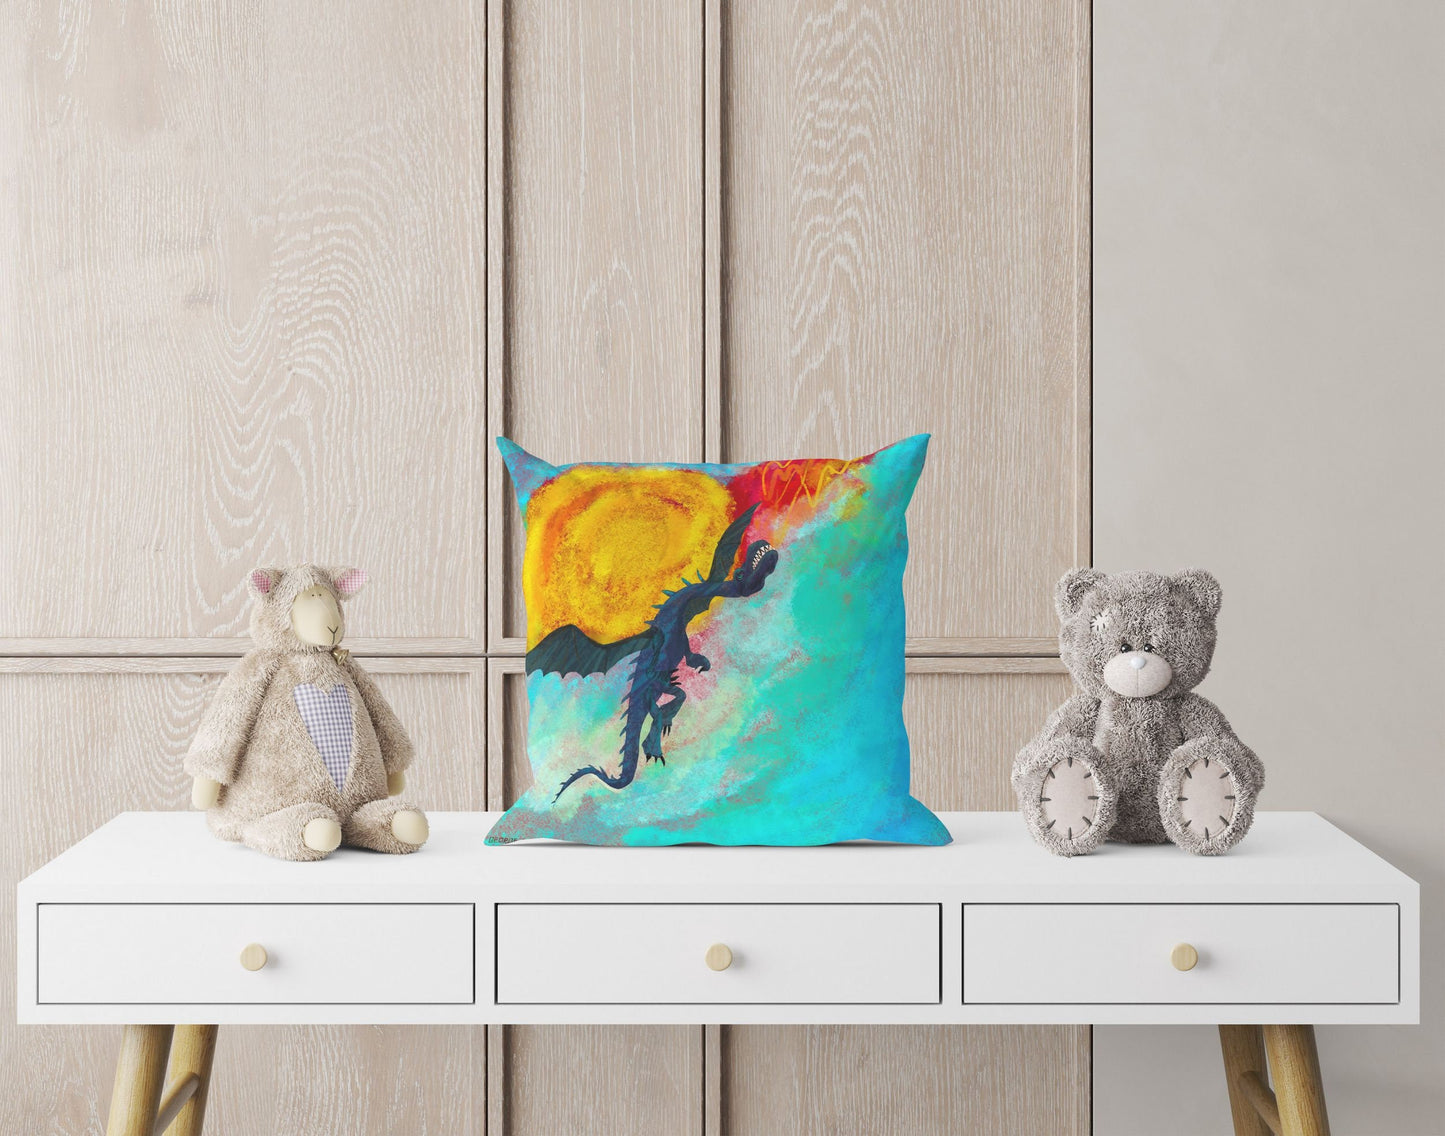 Fire Breathing Dragon Fantasy Pillow Cases For Kids, Decorative Pillow, Abstract Throw Pillow Cover, Artist Pillow, Colorful Pillow Case